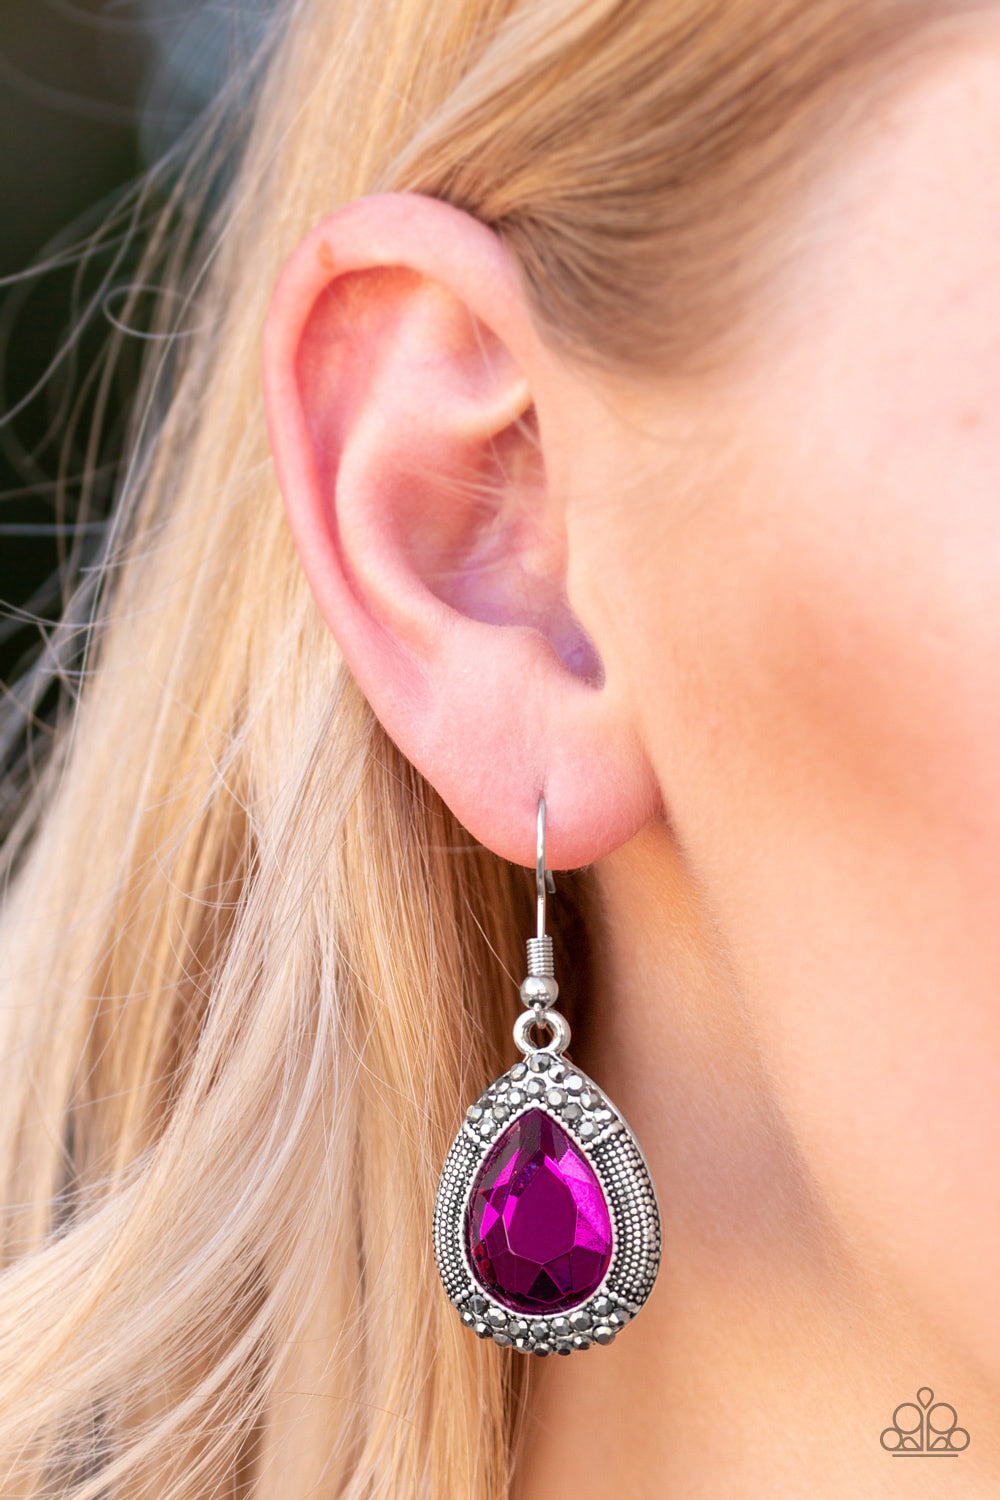 Grandmaster Shimmer Pink Earrings - TheMasterCollection